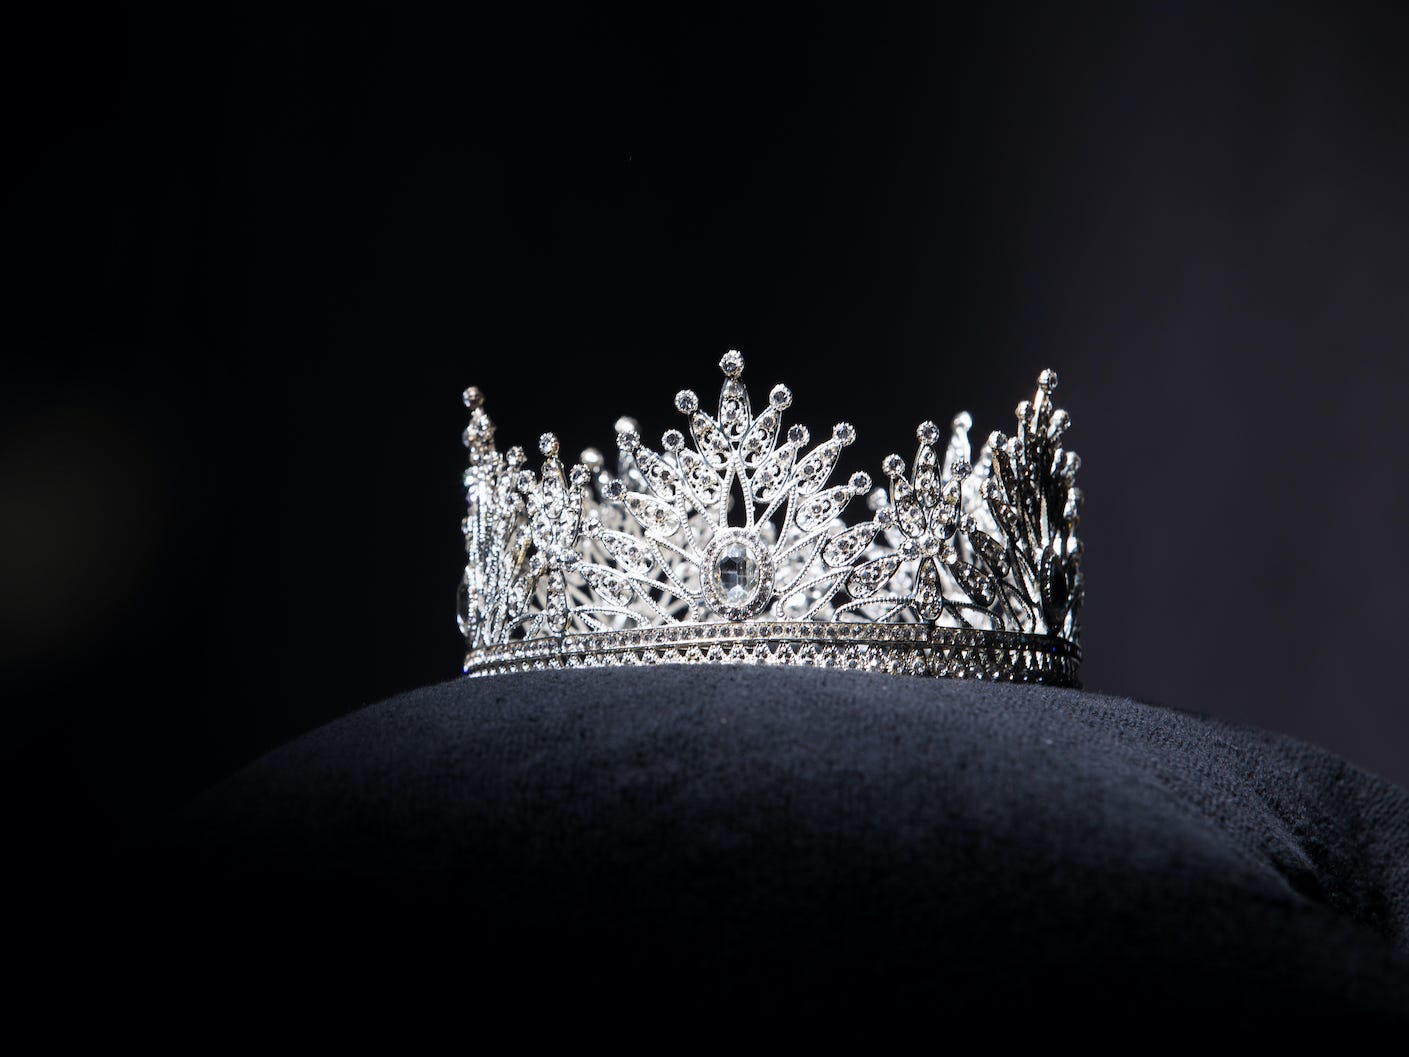 A beauty pageant crown on a pillow.